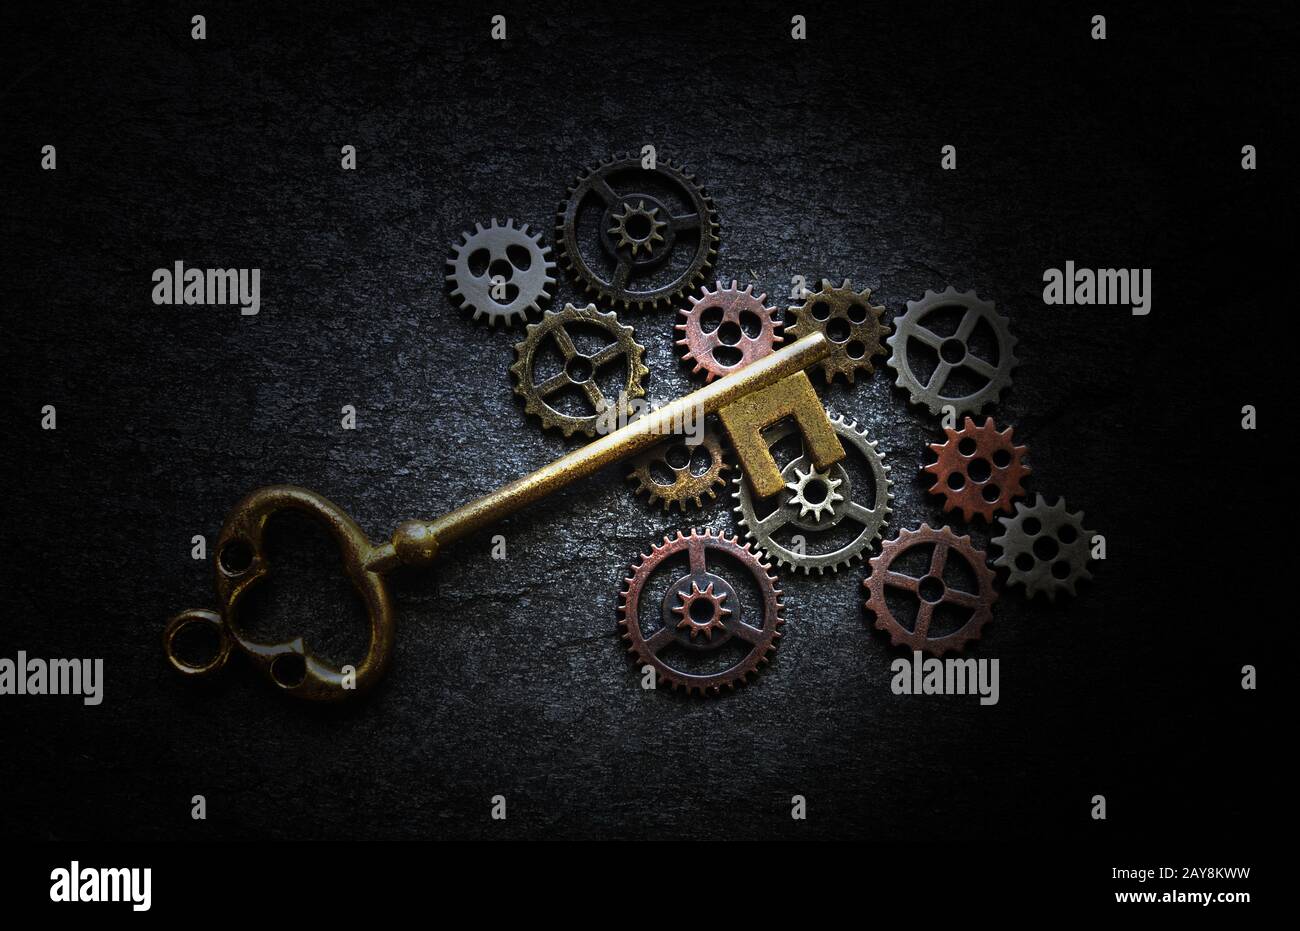 Gears and antique key Stock Photo